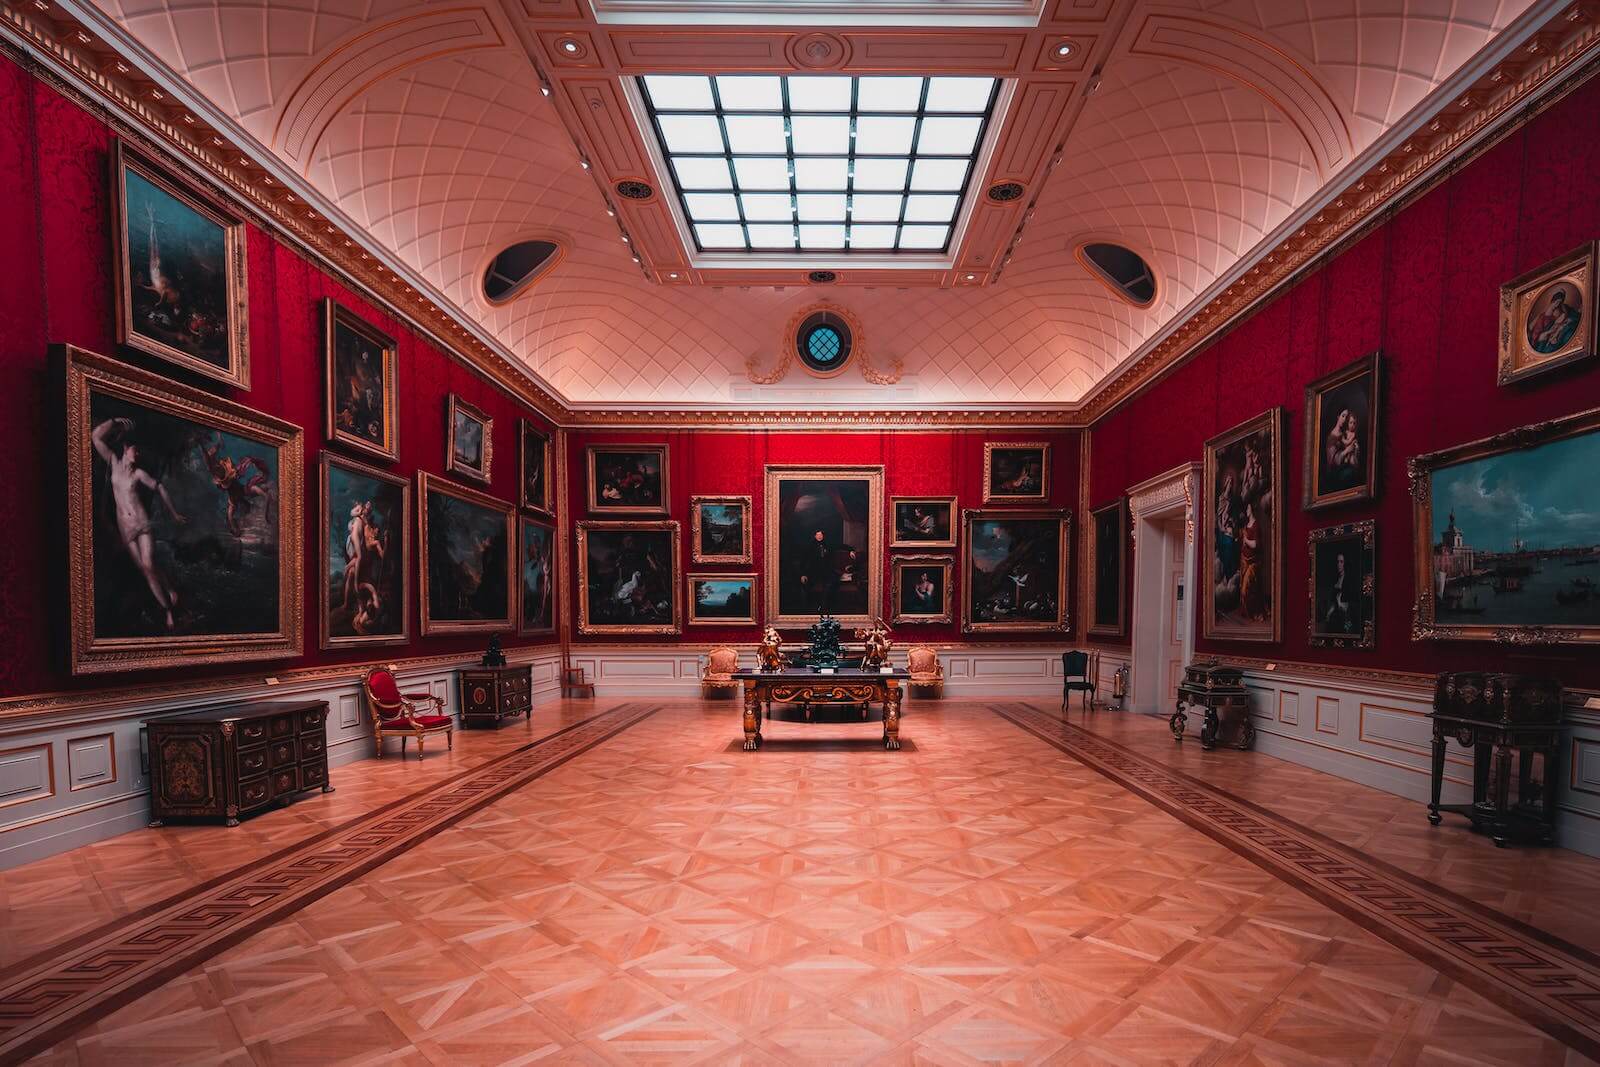 Room at the Wallace Collection in Manchester, London